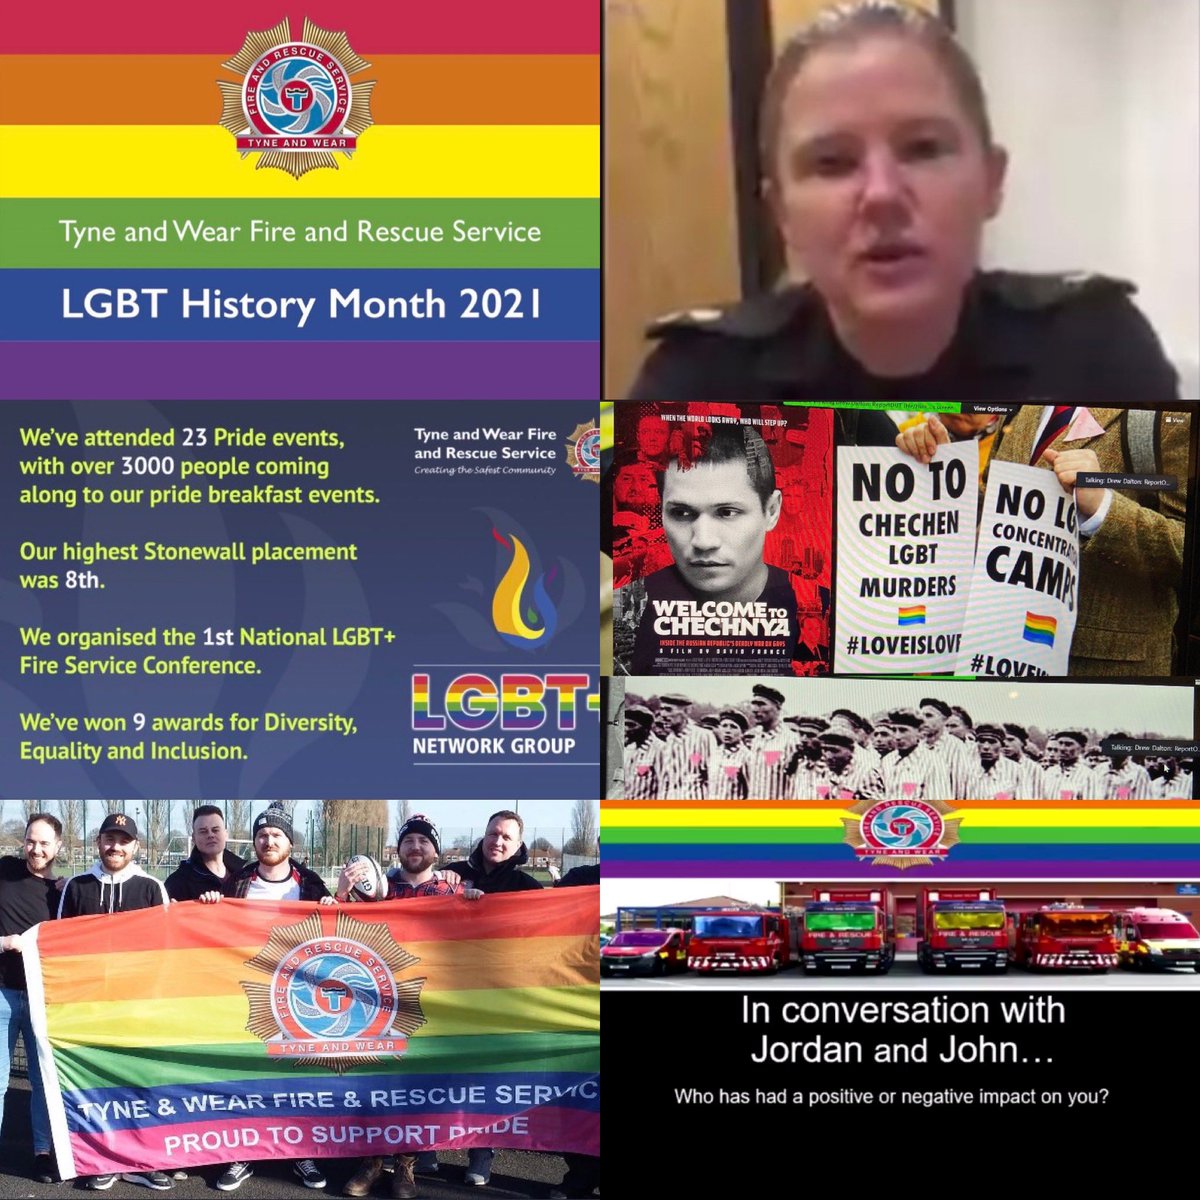 Yesterday was the final day of #LGBTHM21 and we wanted to thank everyone who got involved and took part in the many events and sessions we organised.  Here’s hoping next years a little more normal.